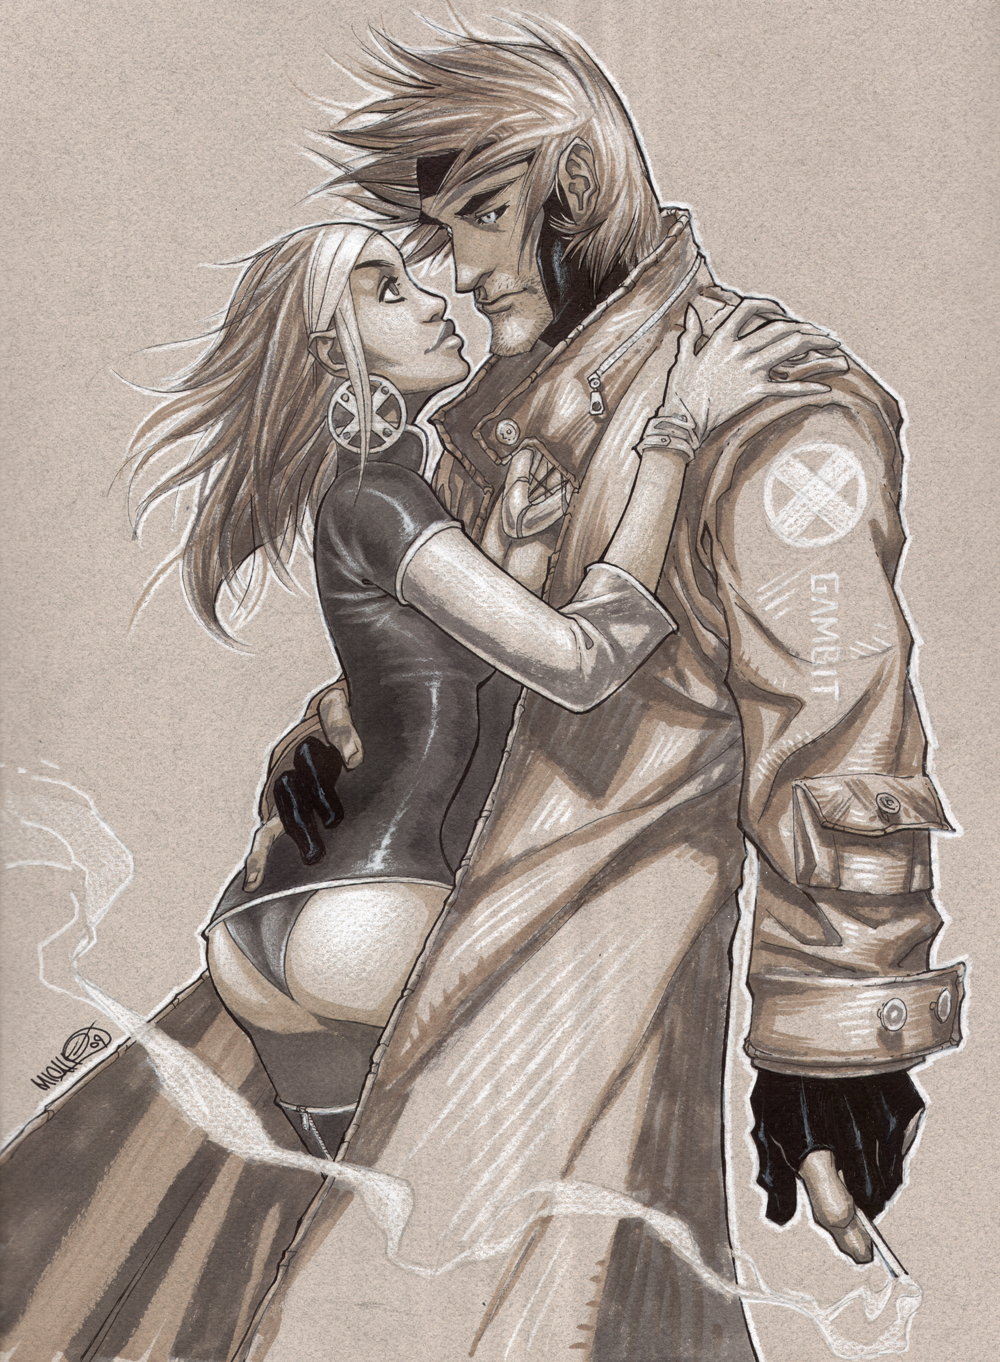 Gambit_and_Rogue_Commission_by_sonofdavinci.jpg